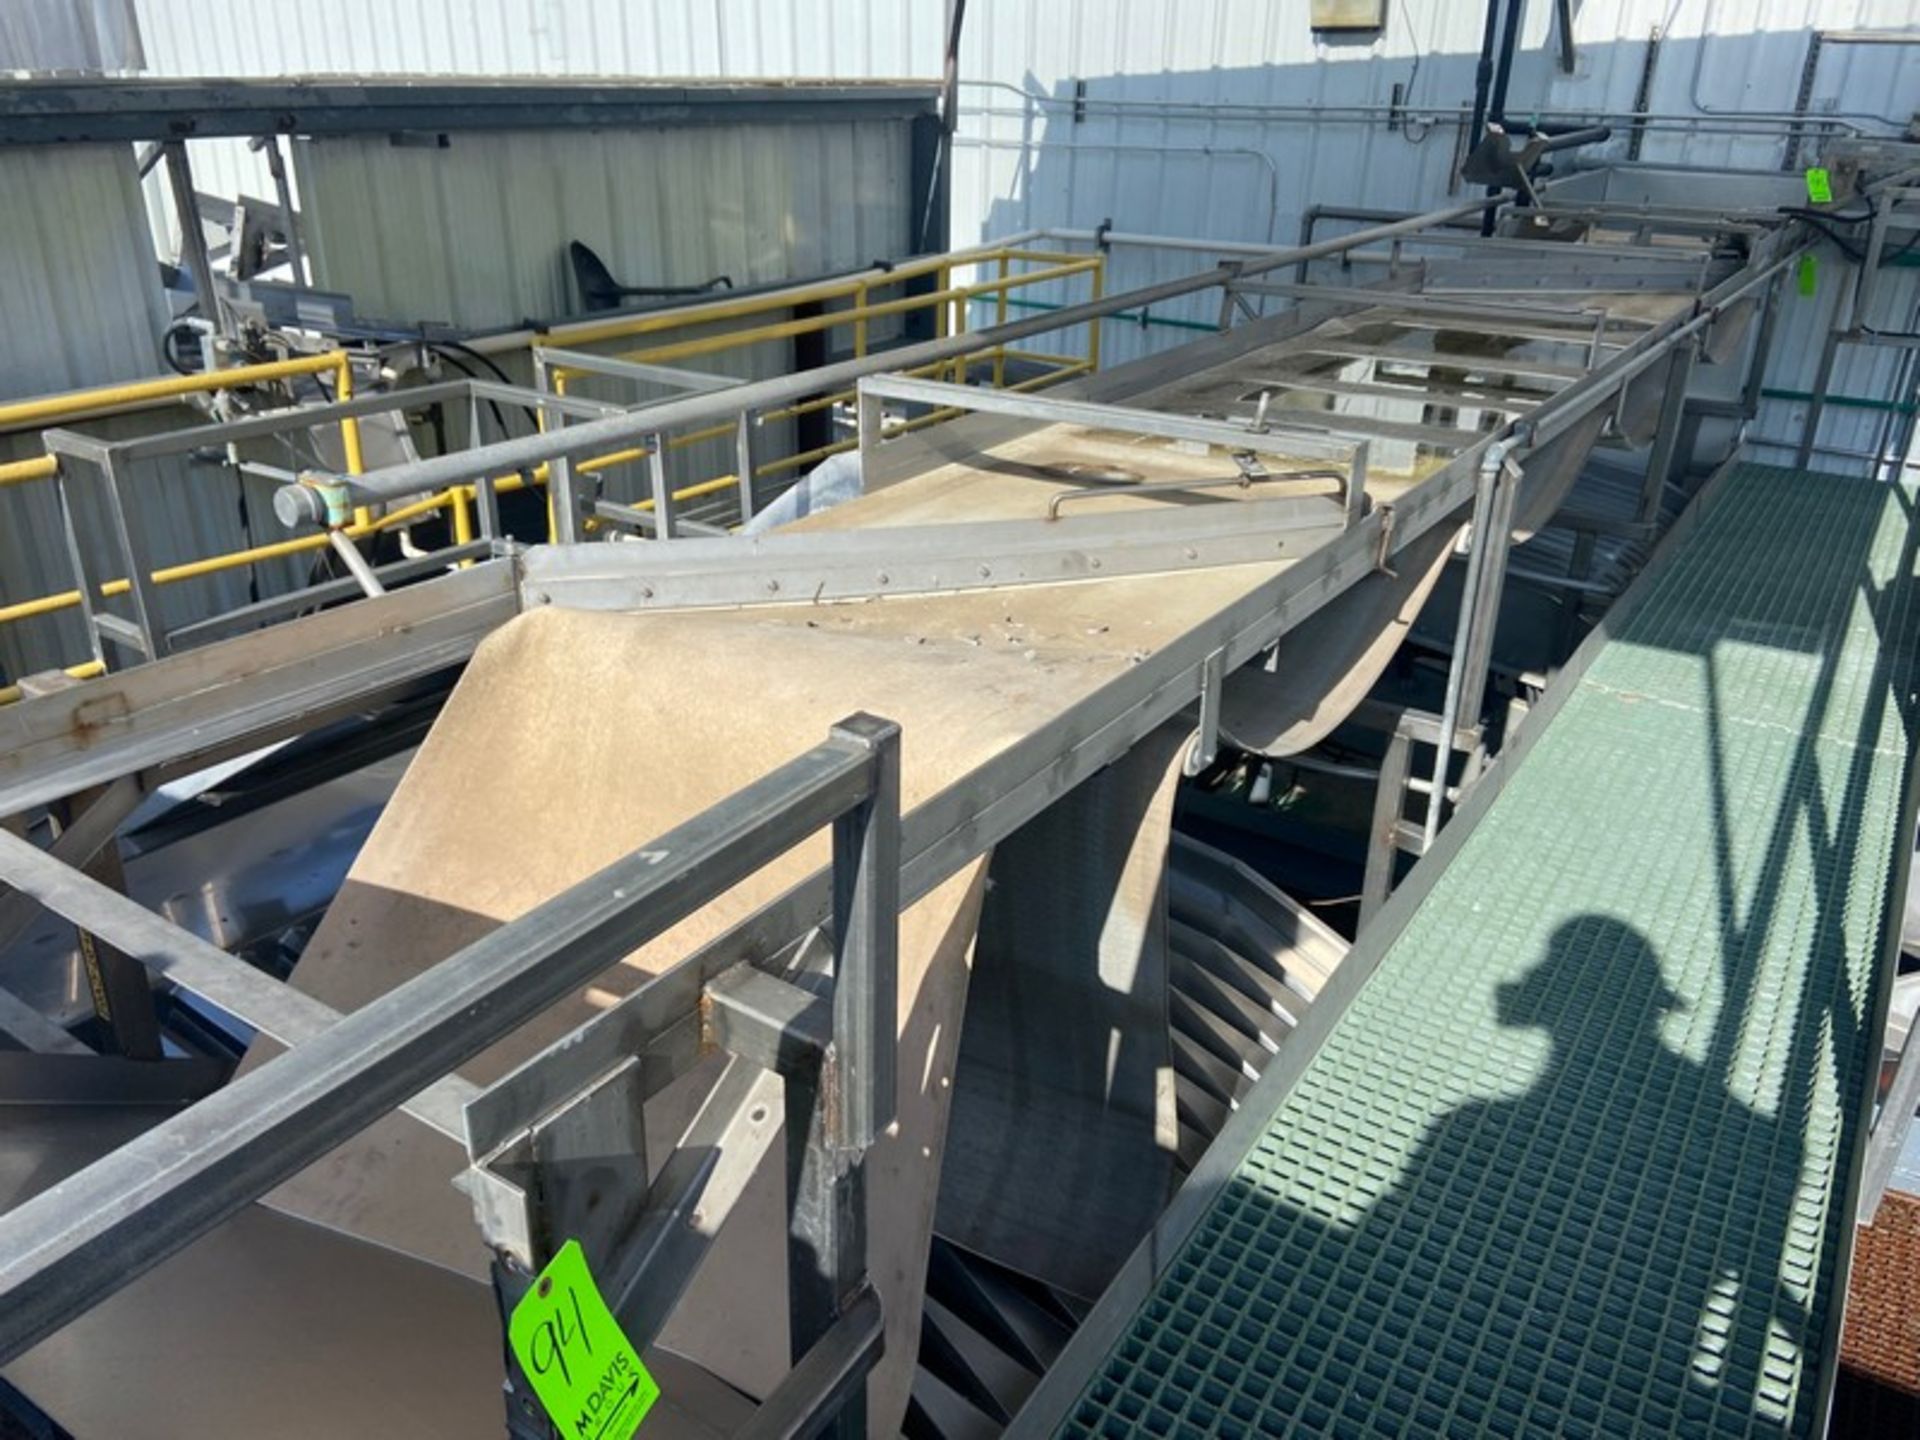 Straight Section of Distribution Conveyor, Aprox. 25 ft. L x 36” W Belt, with (2) S/S Chutes Leading